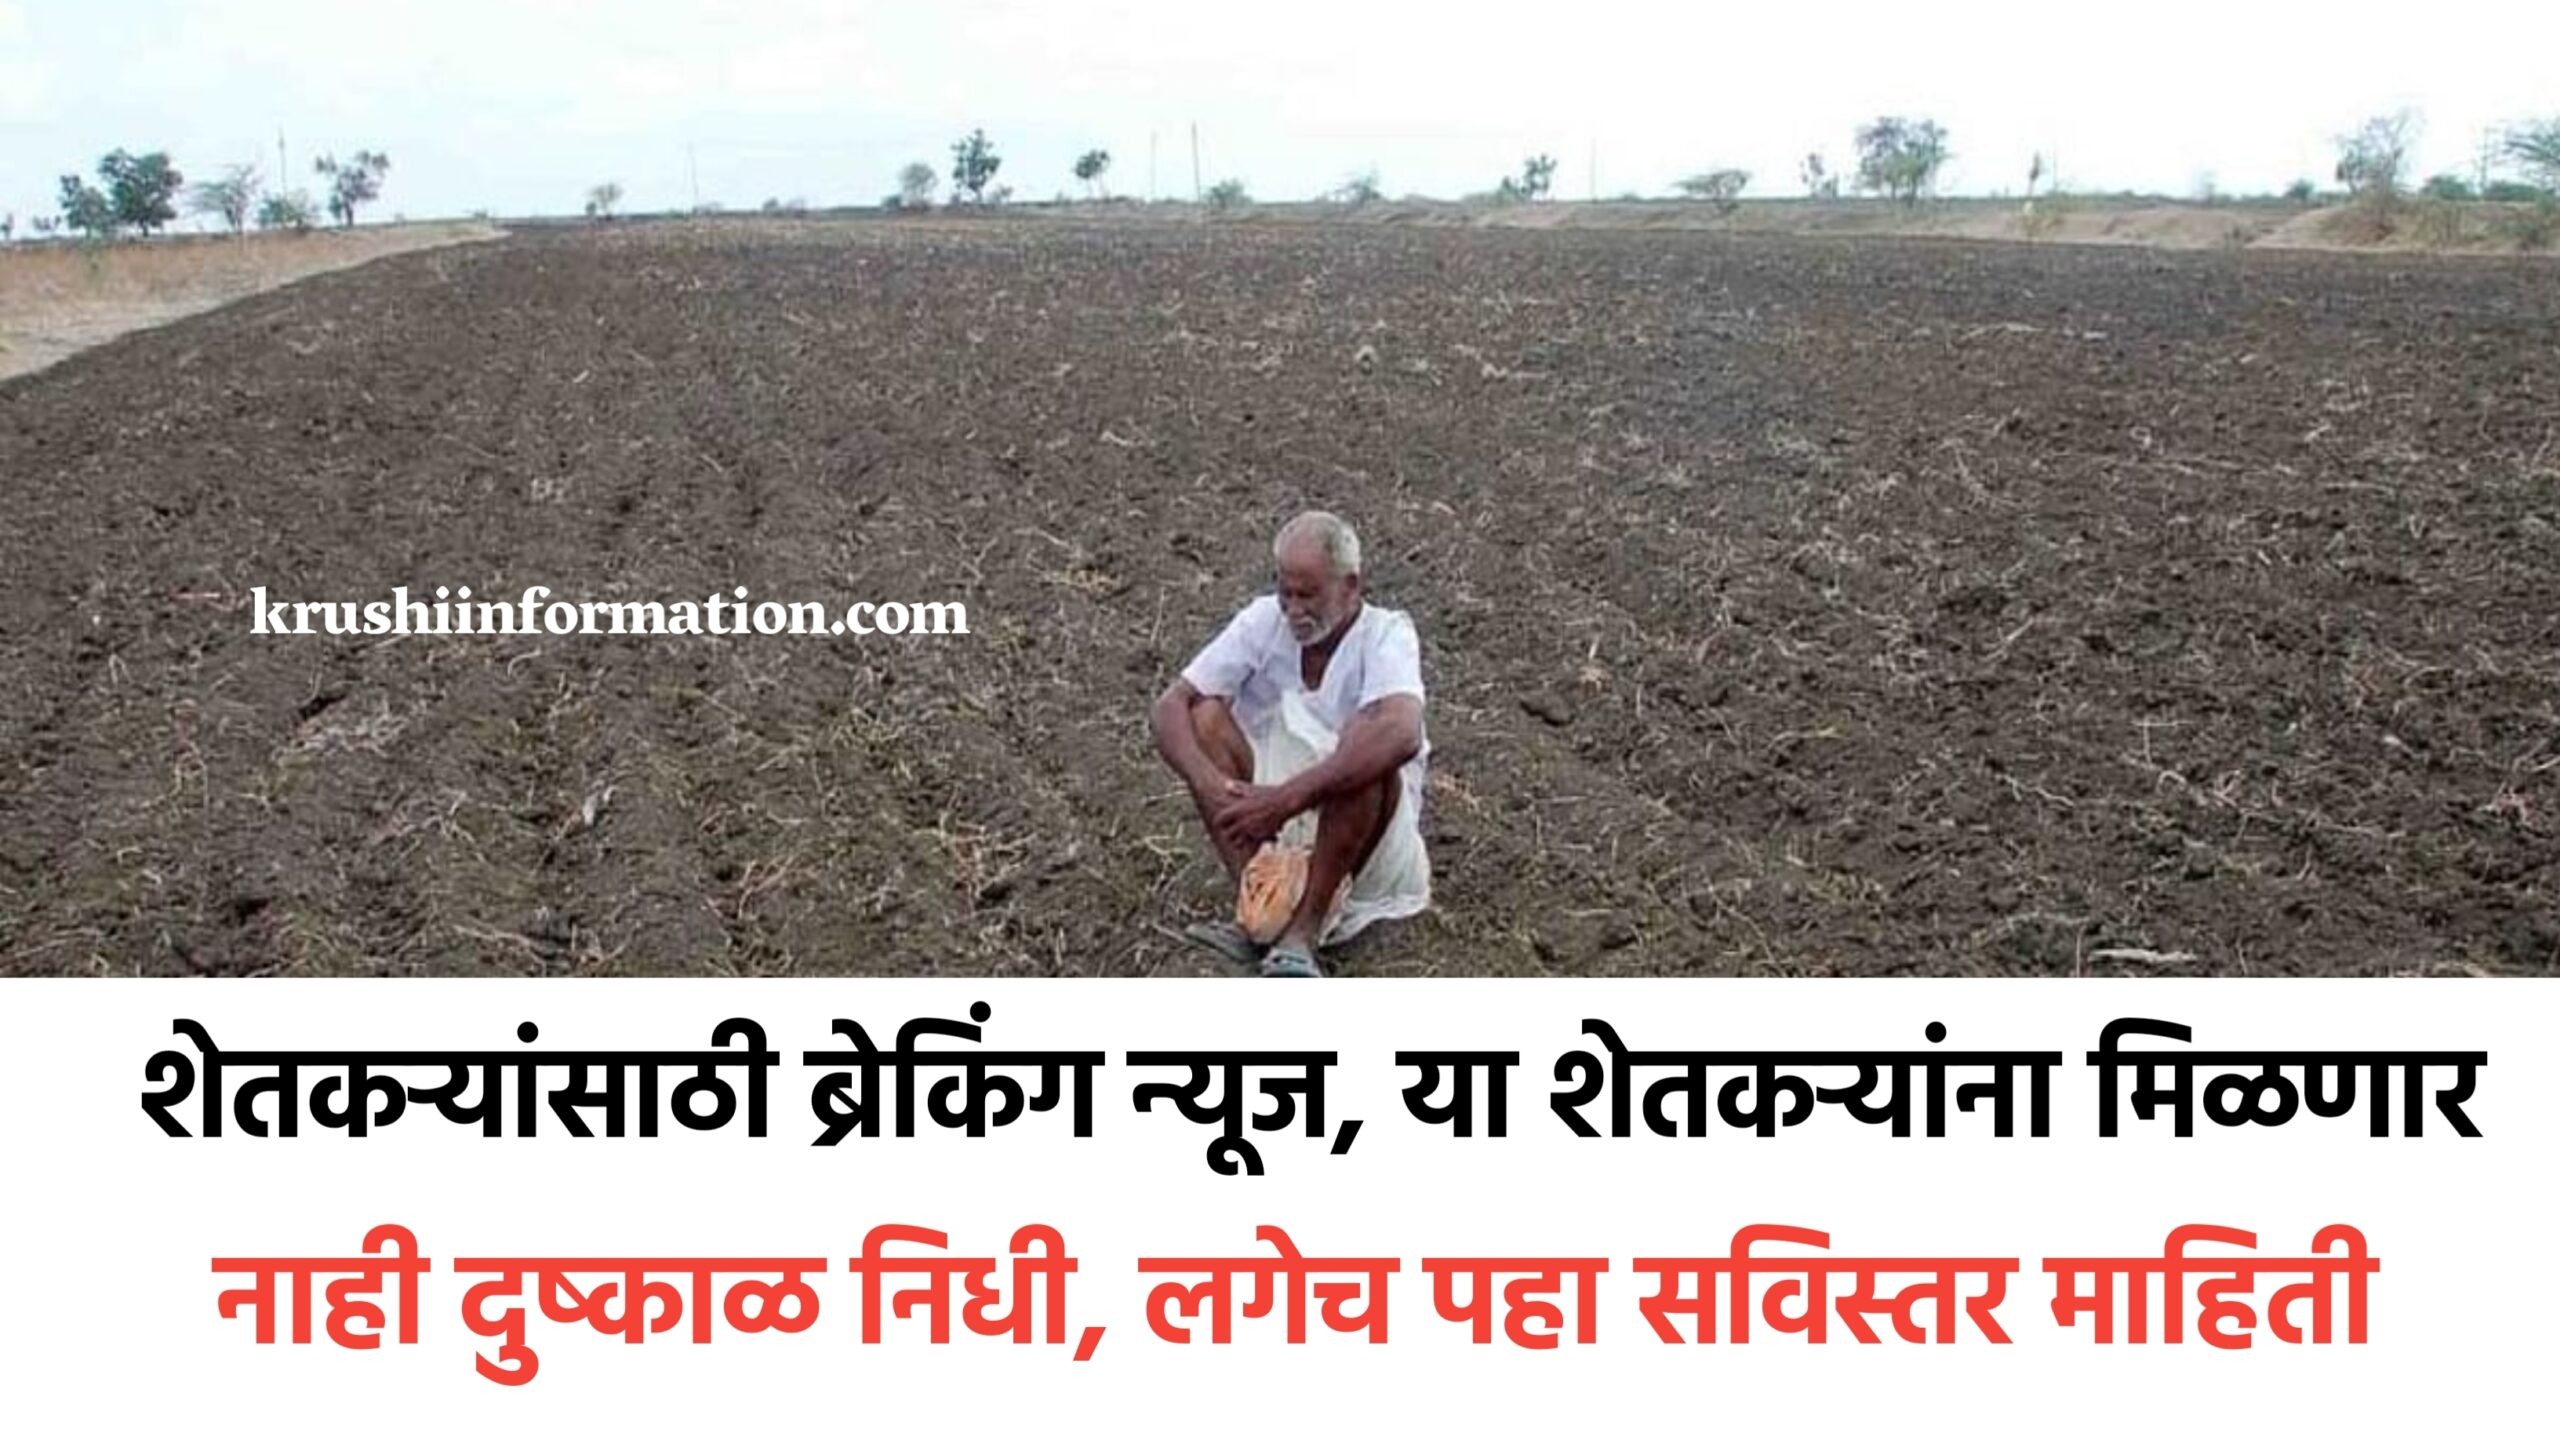 Drought fund to farmers